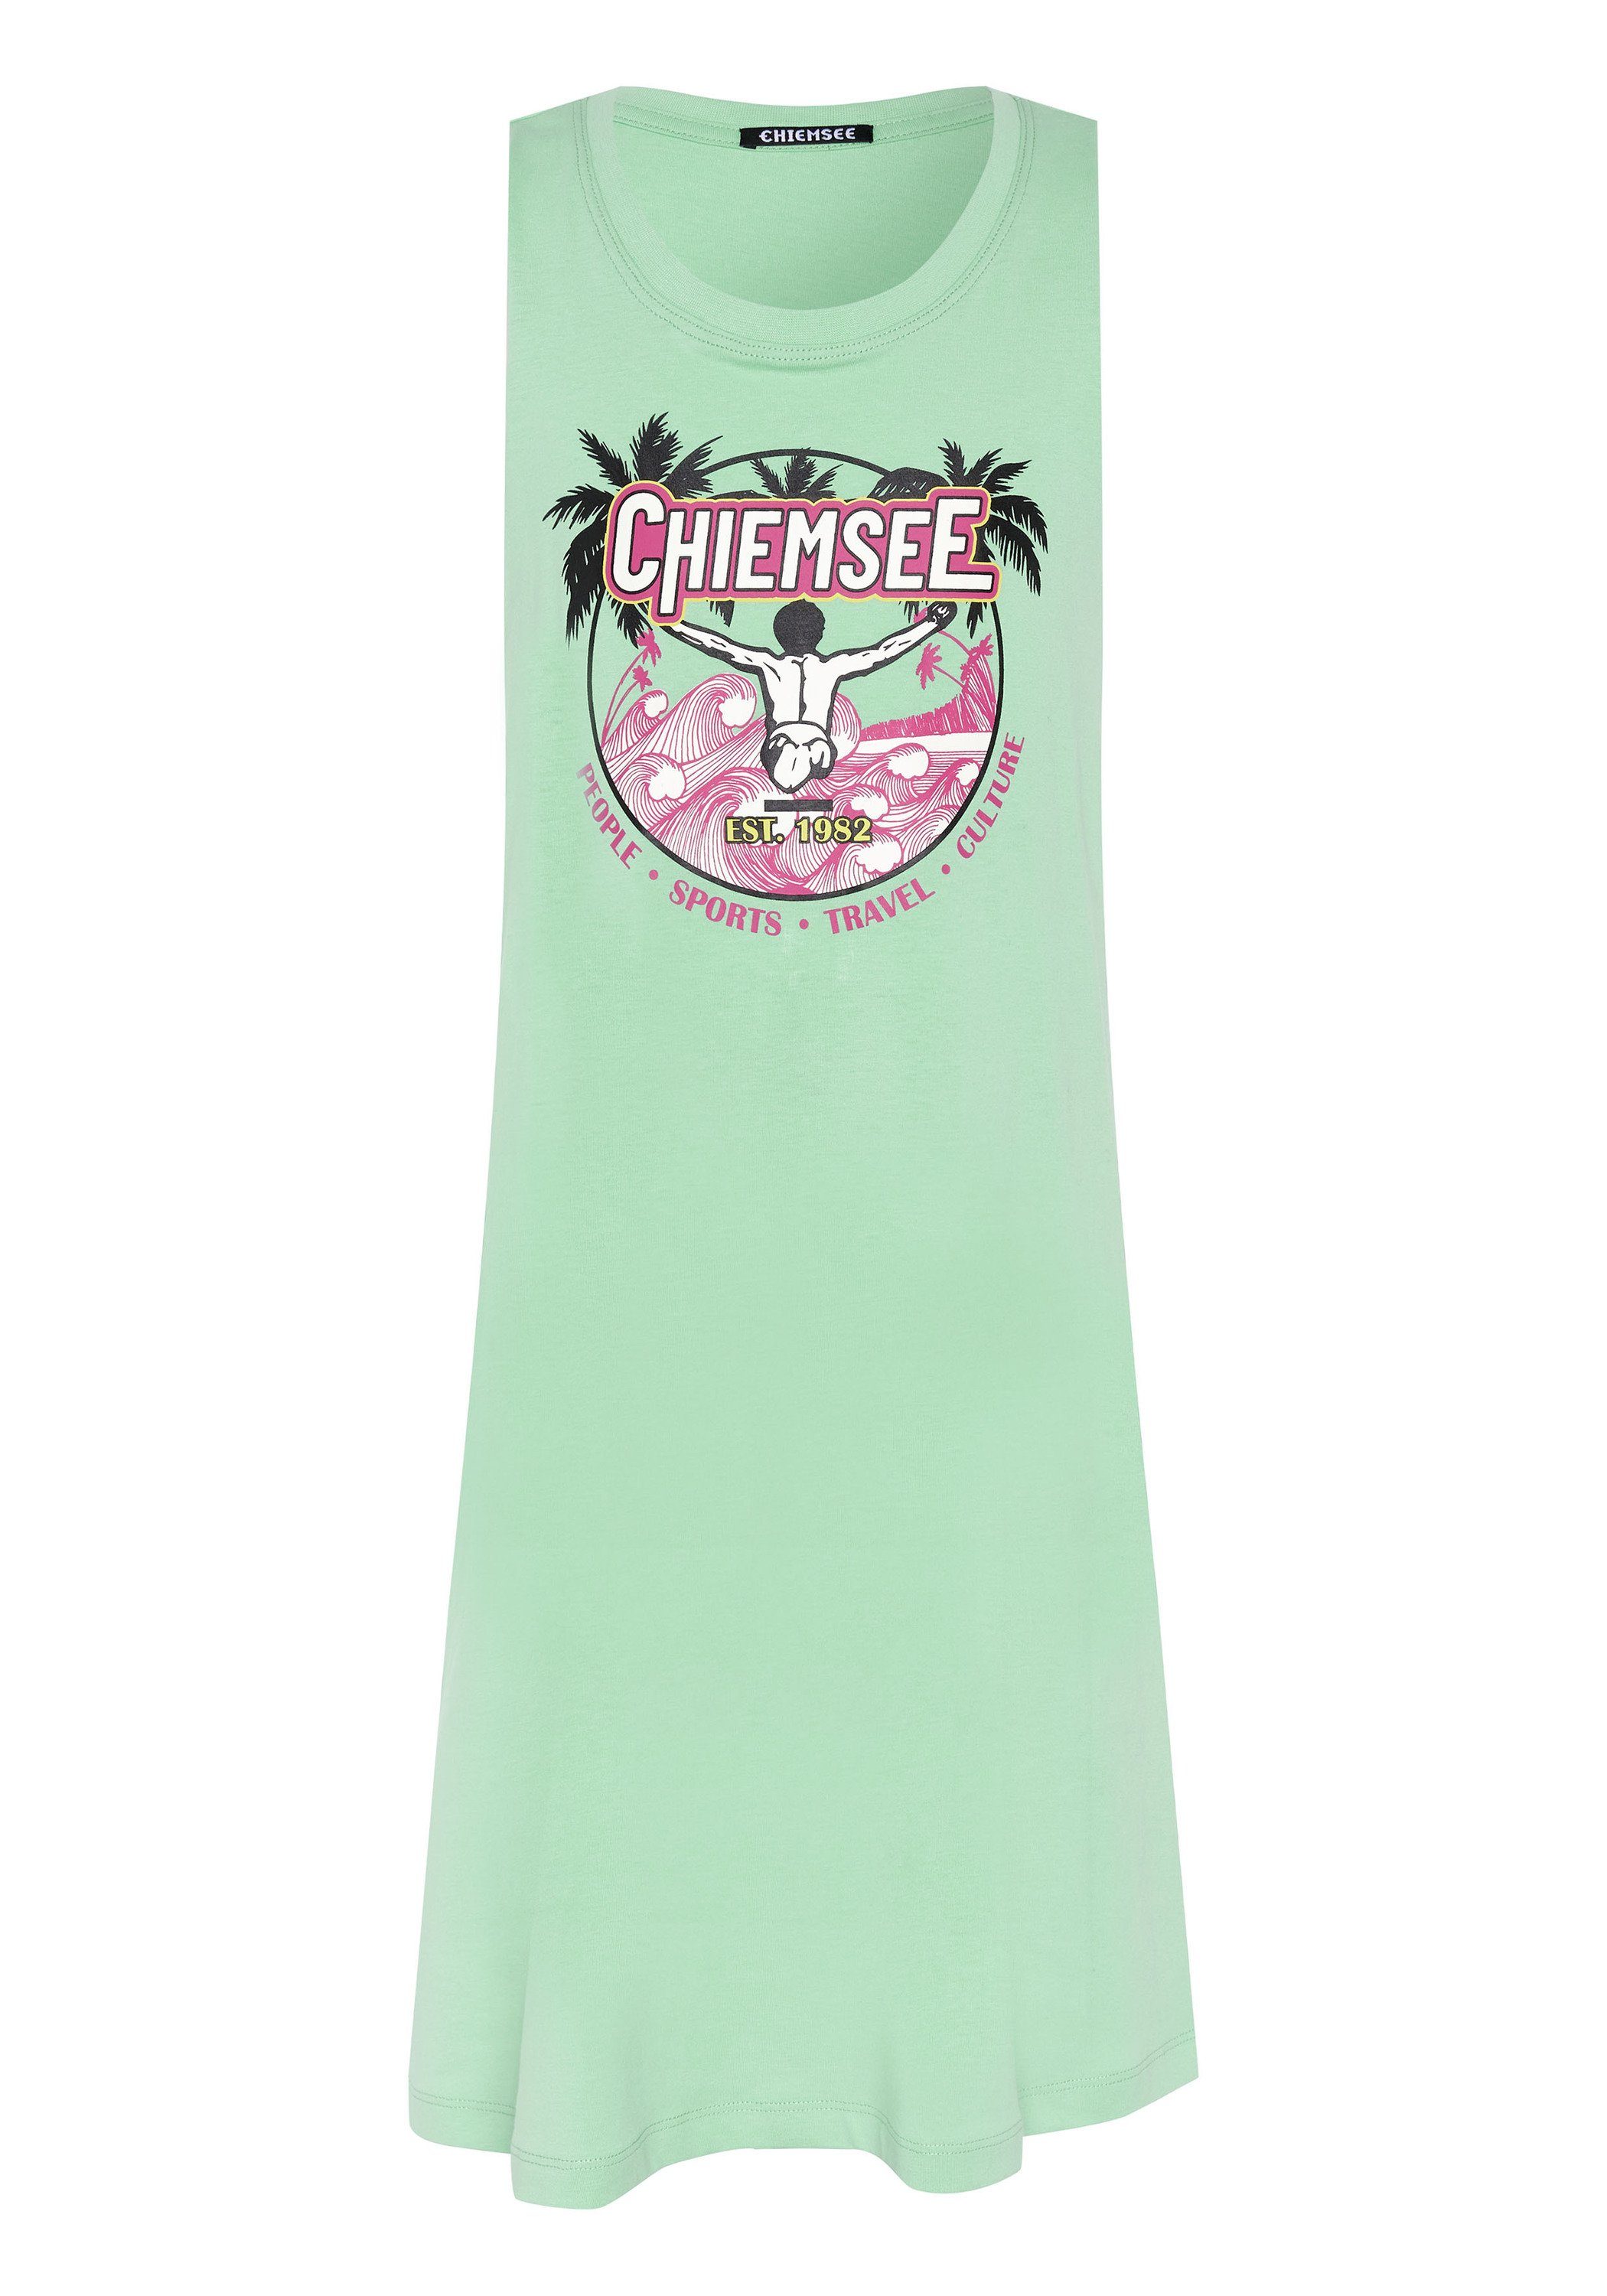 und Neptune Longtop Cut-Out mit Green Chiemsee 1 Labelprint Tanktop